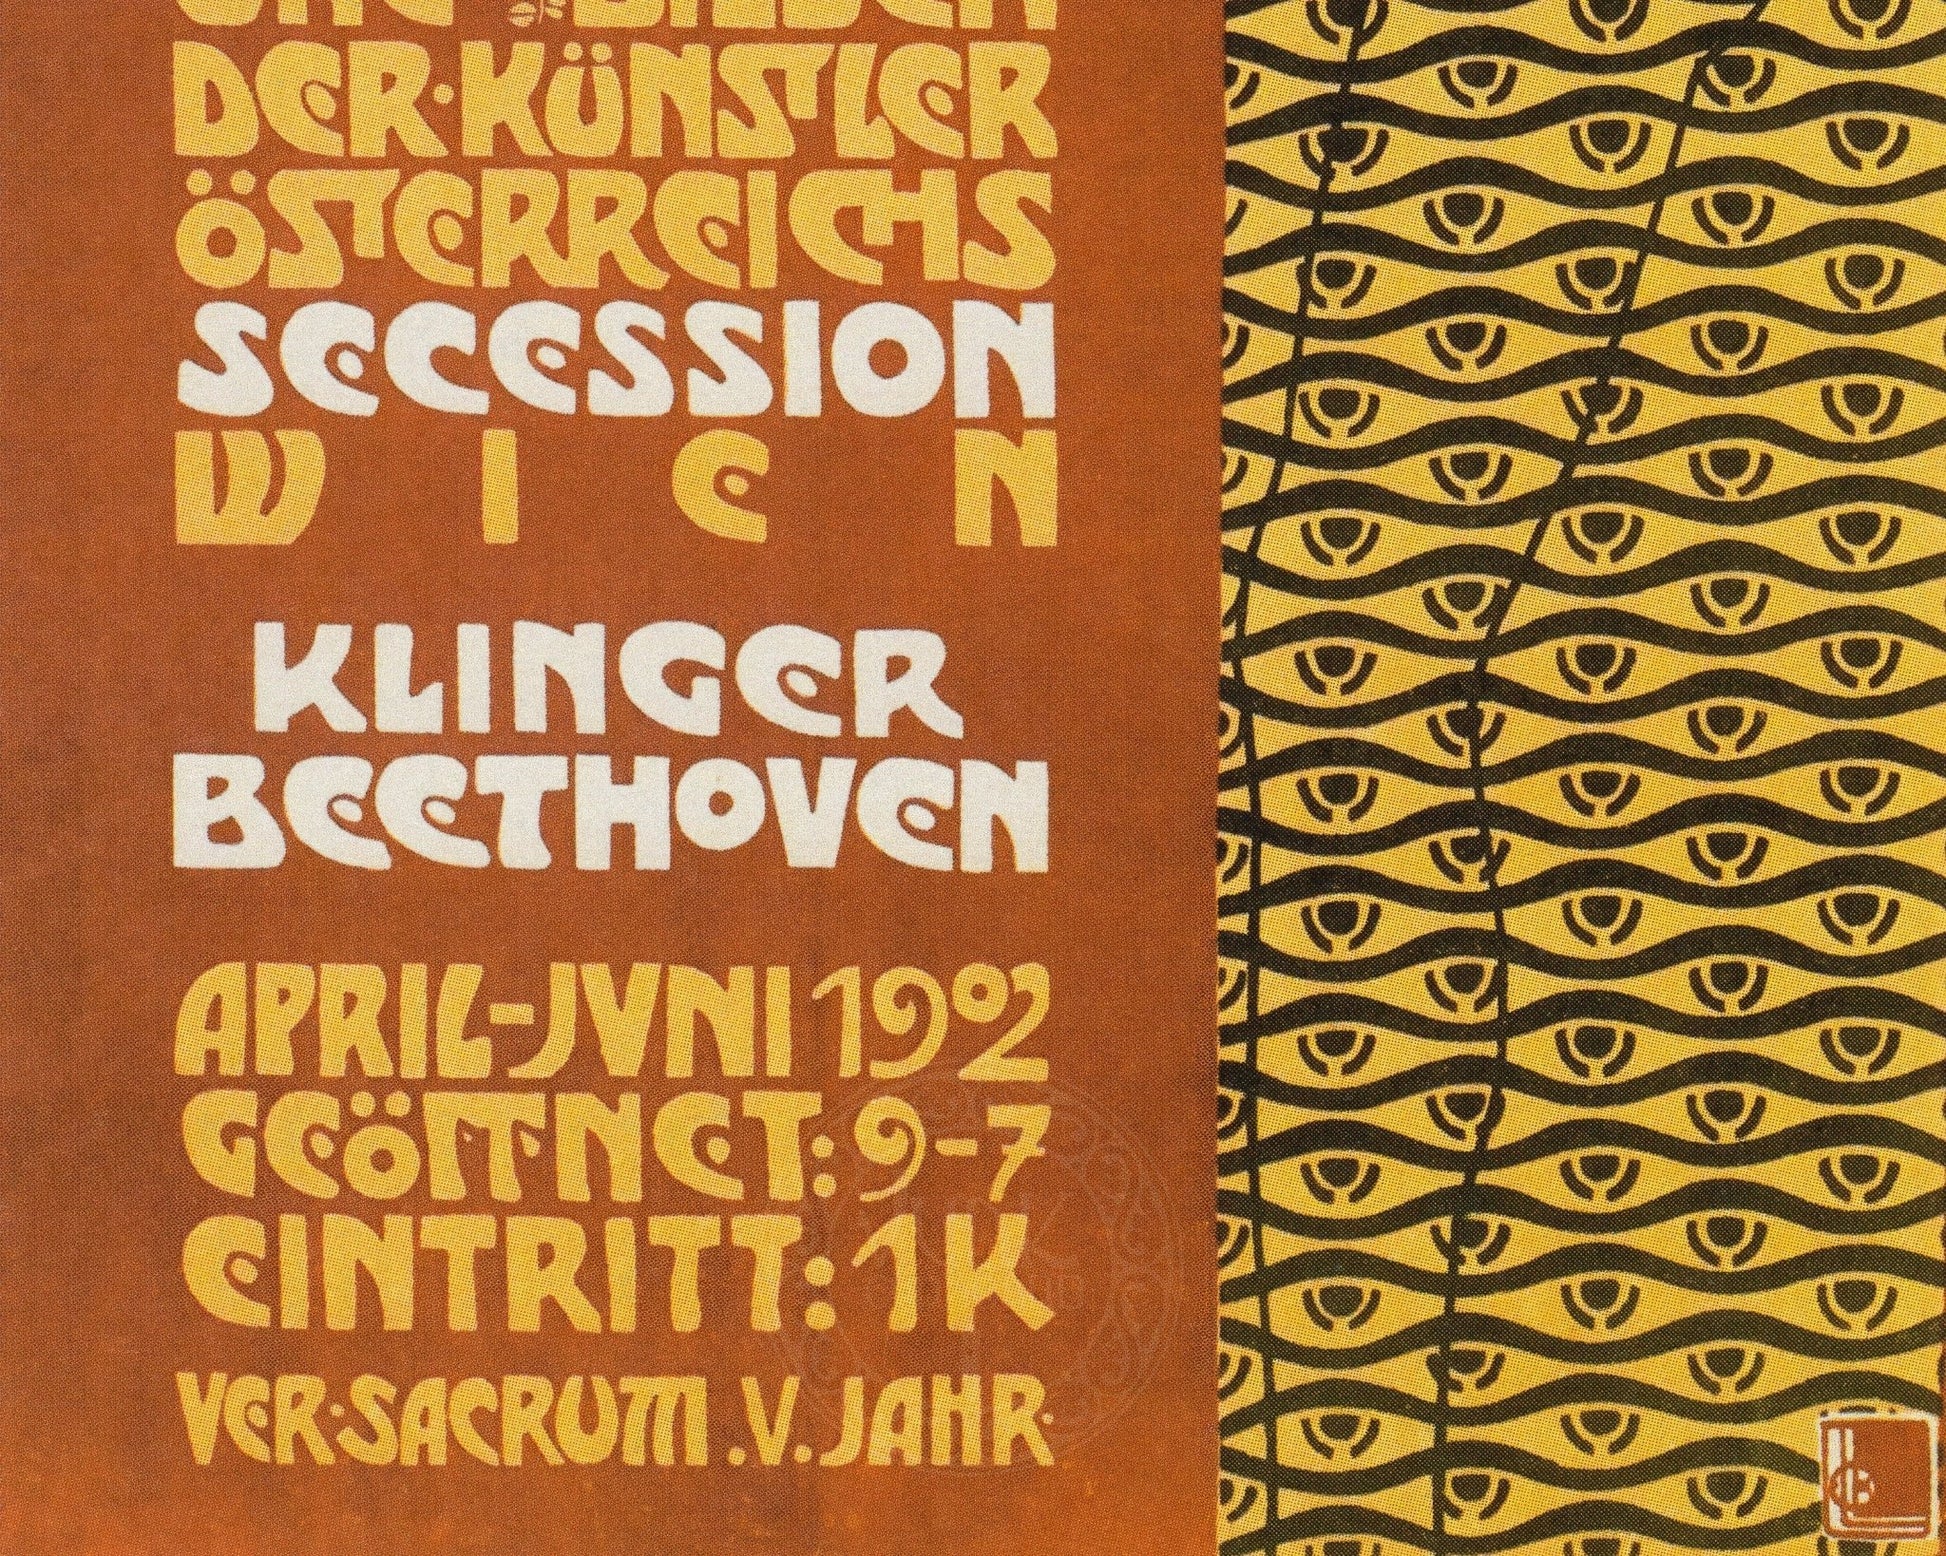 Alfred Roller "14th Viennese Secession Exhibition Poster" (c.1902) - Mabon Gallery